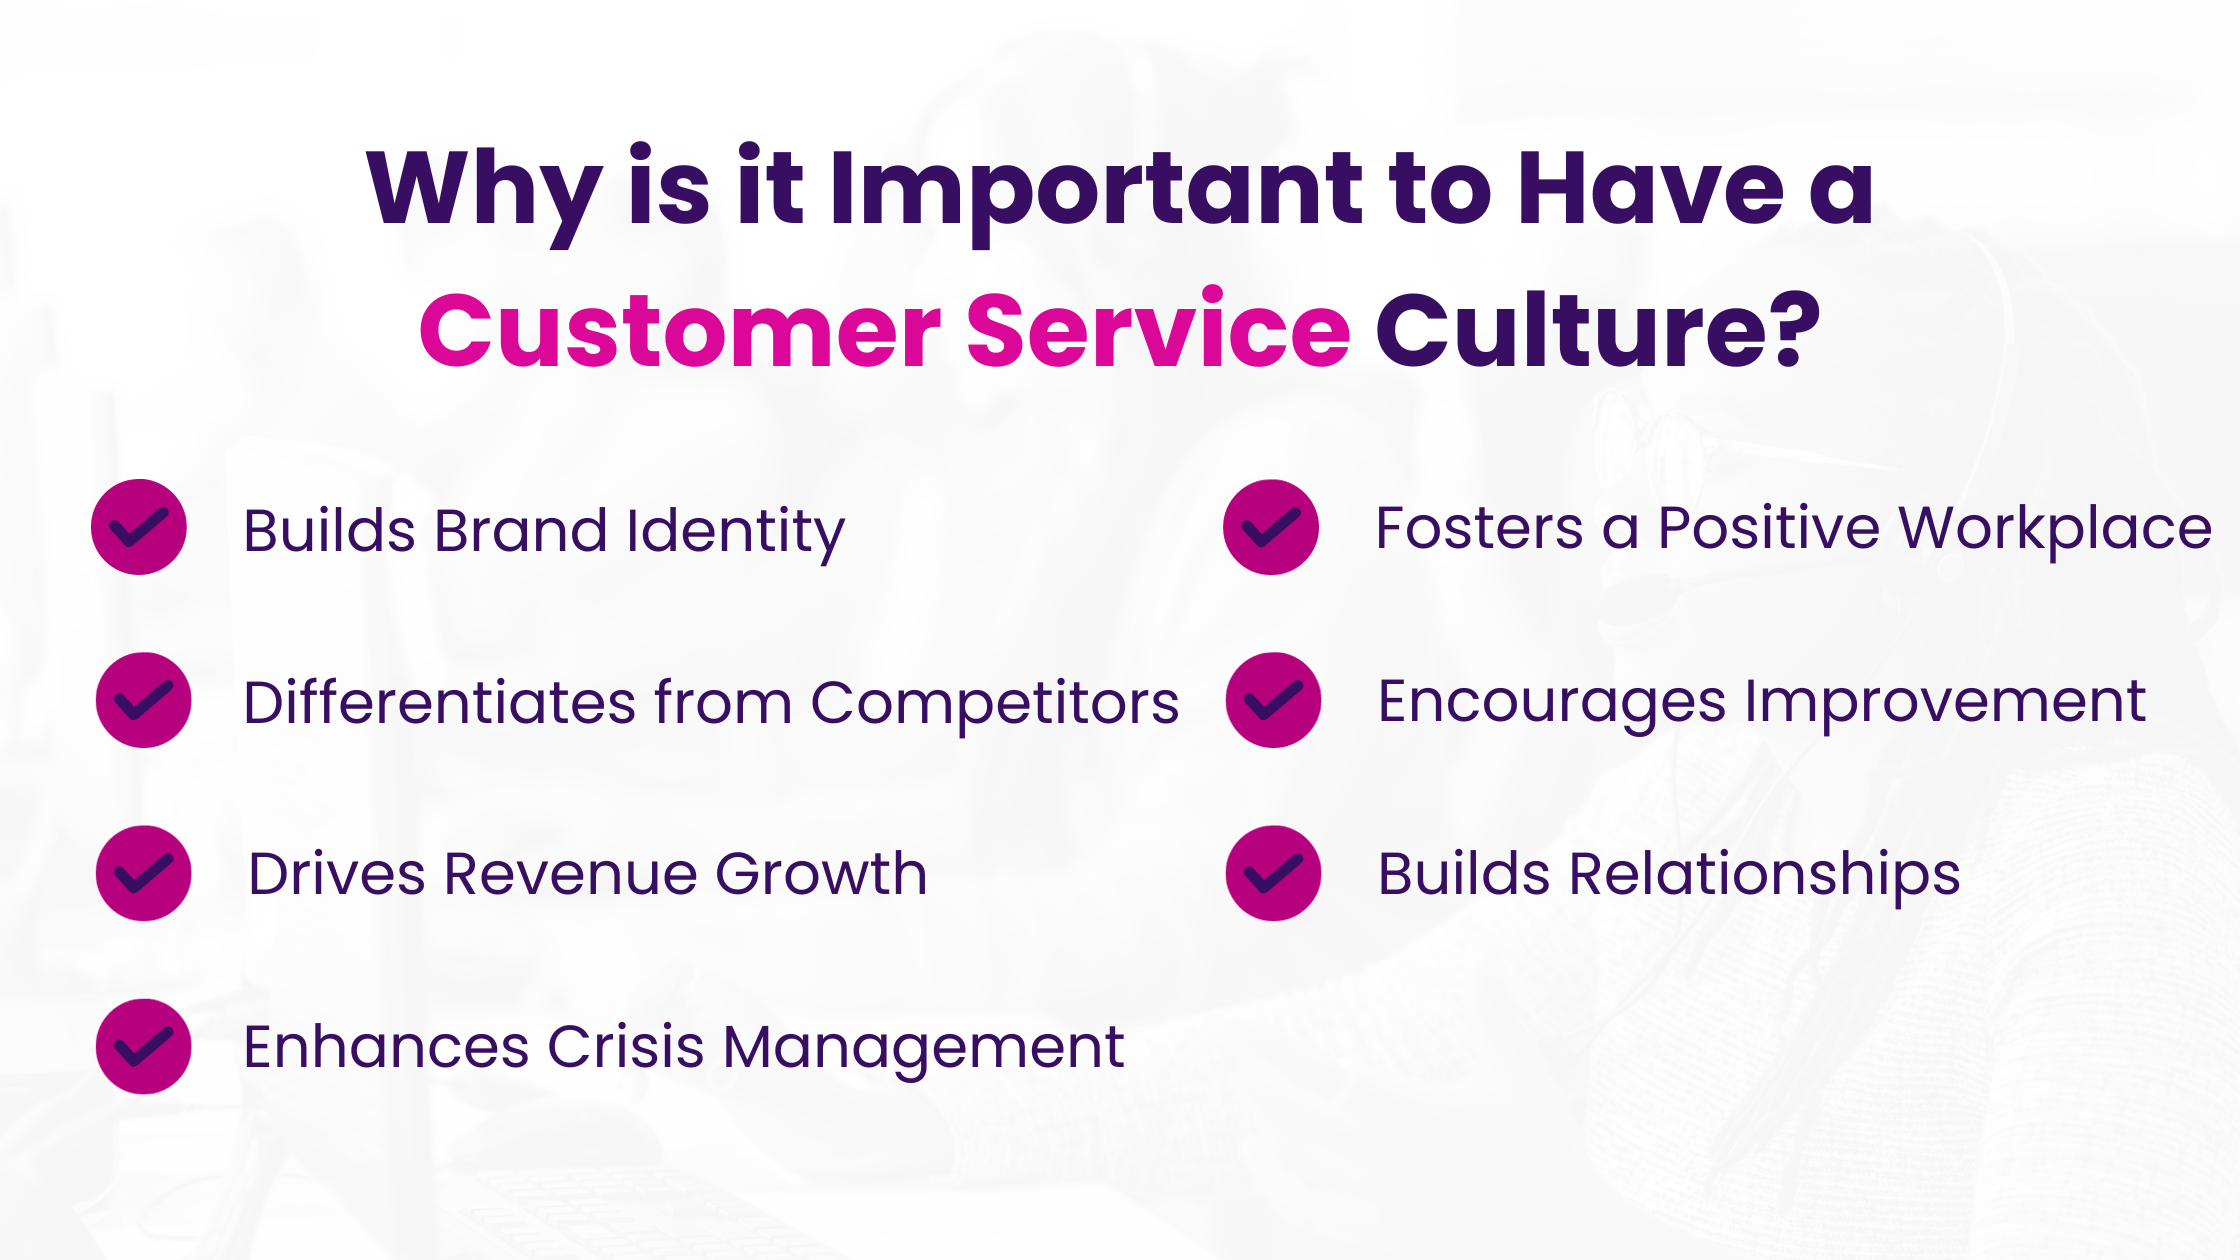 Why is it Important to Have a Customer Service Culture